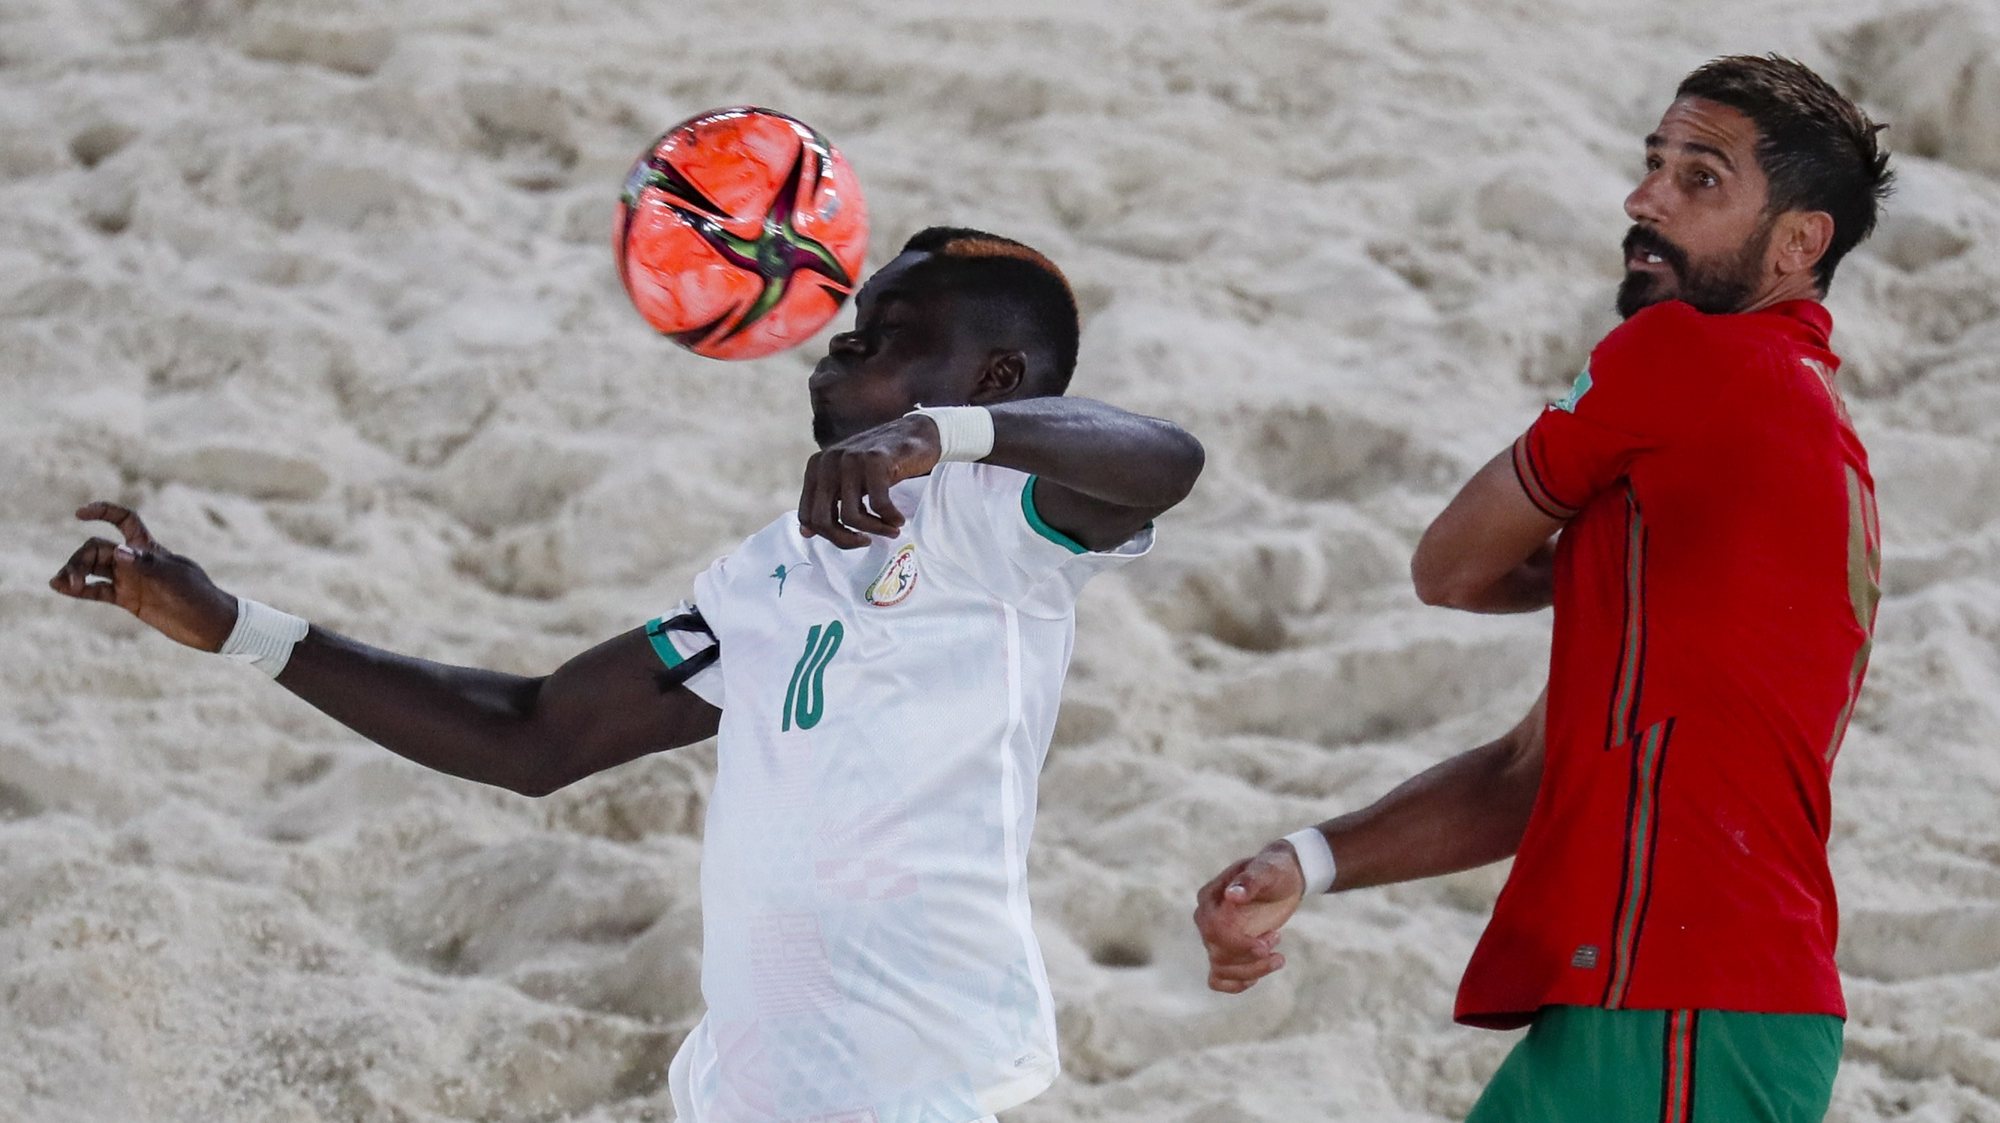 epa09425245 Torres (R) of Portugal in action against Mamour Diagne of Senegal during the FIFA Beach Soccer World Cup 2021 match between Senegal and Portugal at Luzhniki Beach Soccer Stadium in Moscow, Russia 22 August 2021.  EPA/YURI KOCHETKOV